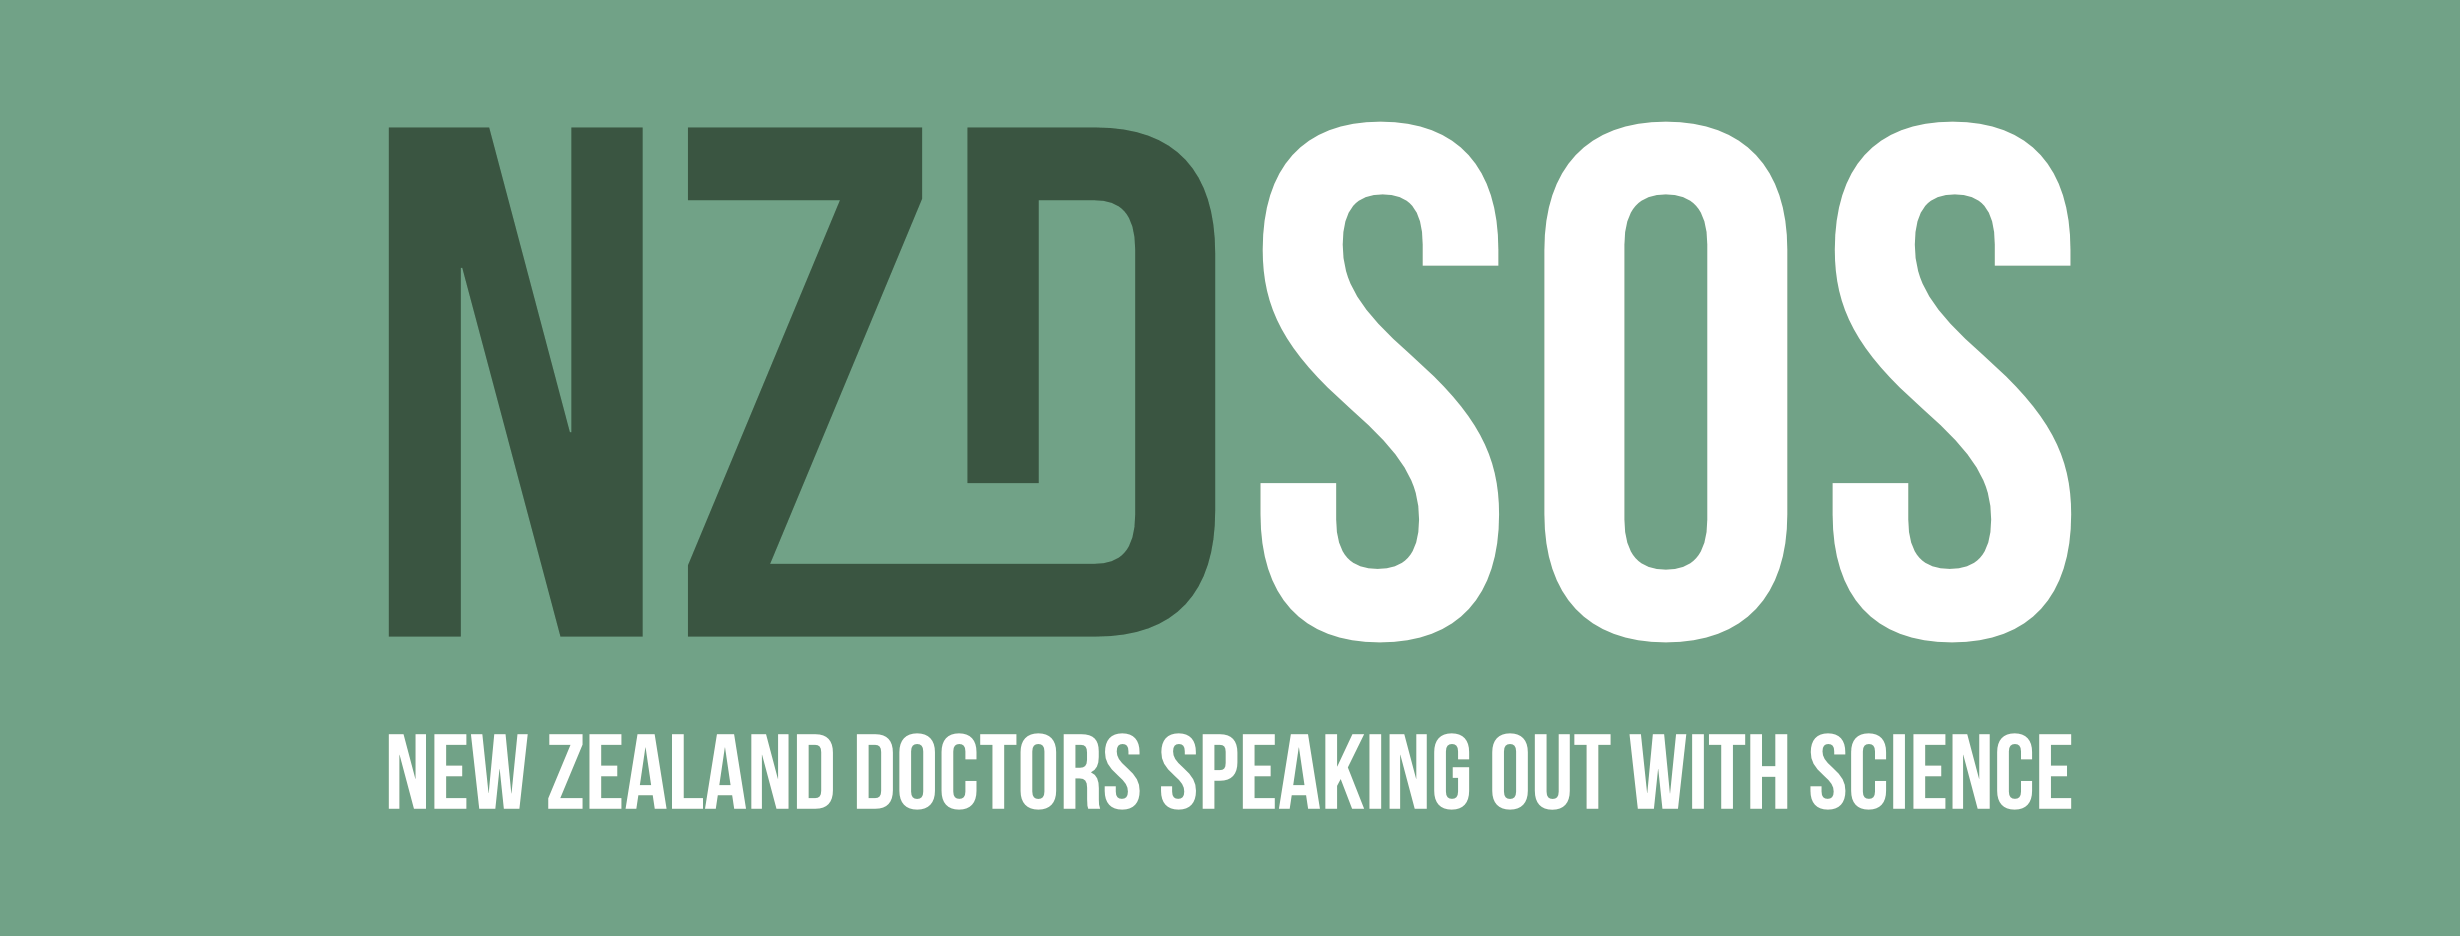 New Zealand Doctors Speaking Out with Science